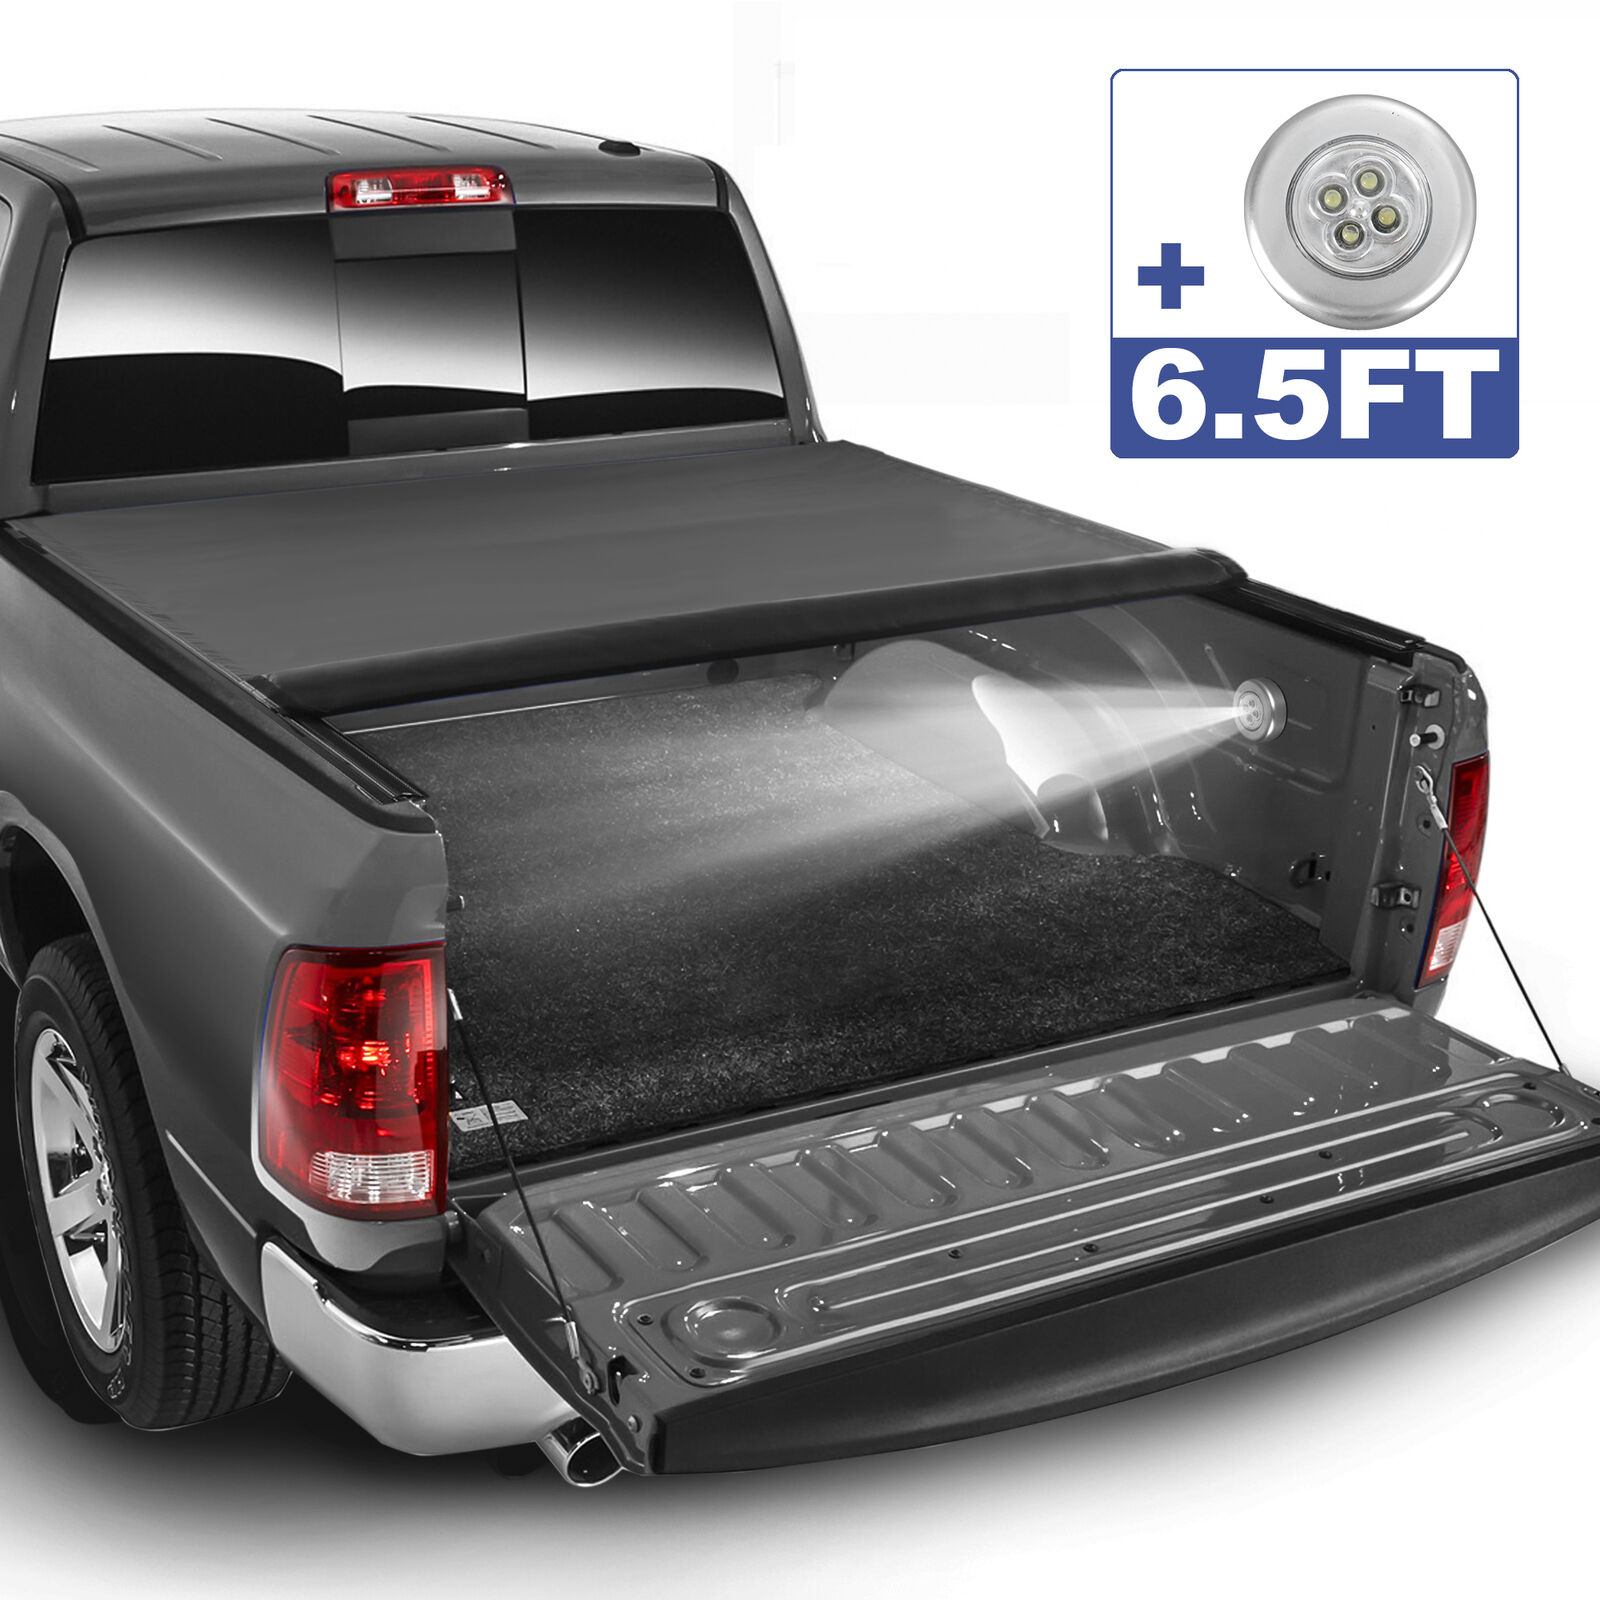 Truck Tonneau Cover For 2000-2006 Toyota Tundra 6.5FT Bed Roll Up Waterproof